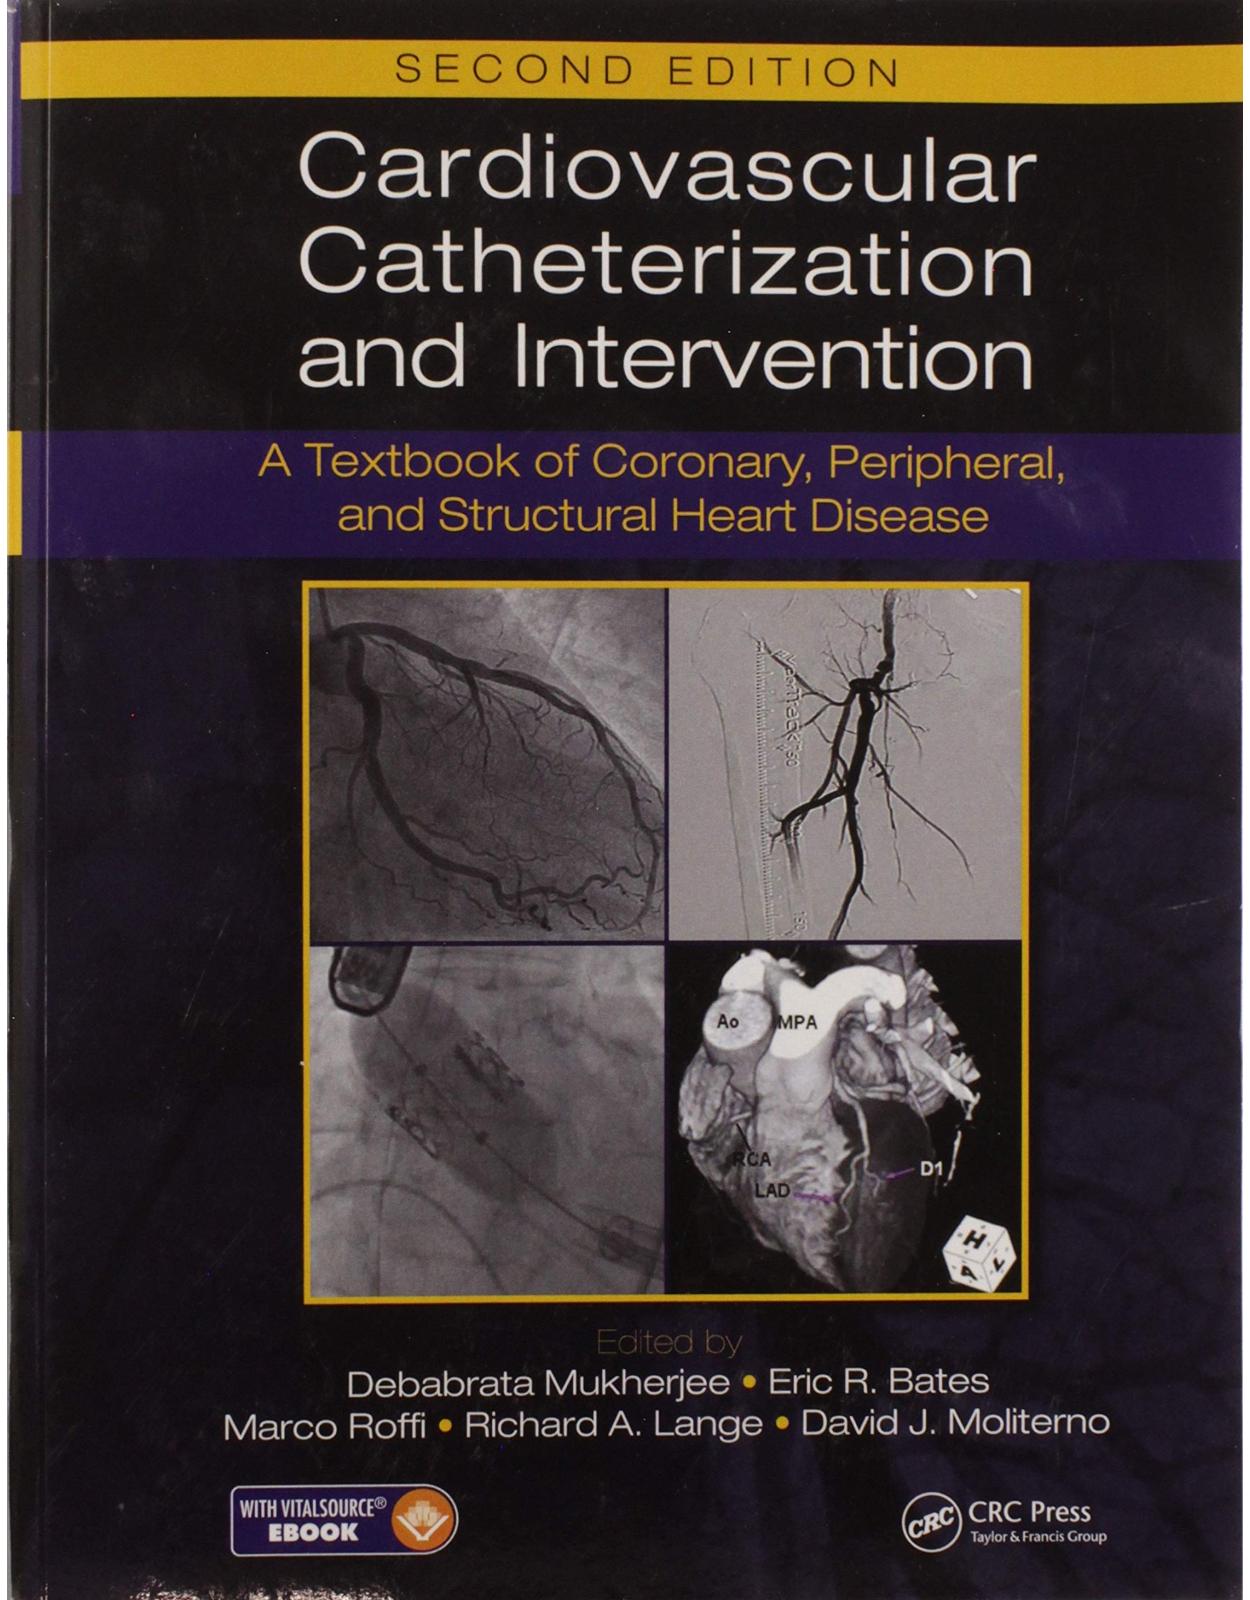 Cardiovascular Catheterization and Intervention: A Textbook of Coronary, Peripheral, and Structural Heart Disease, Second Edition